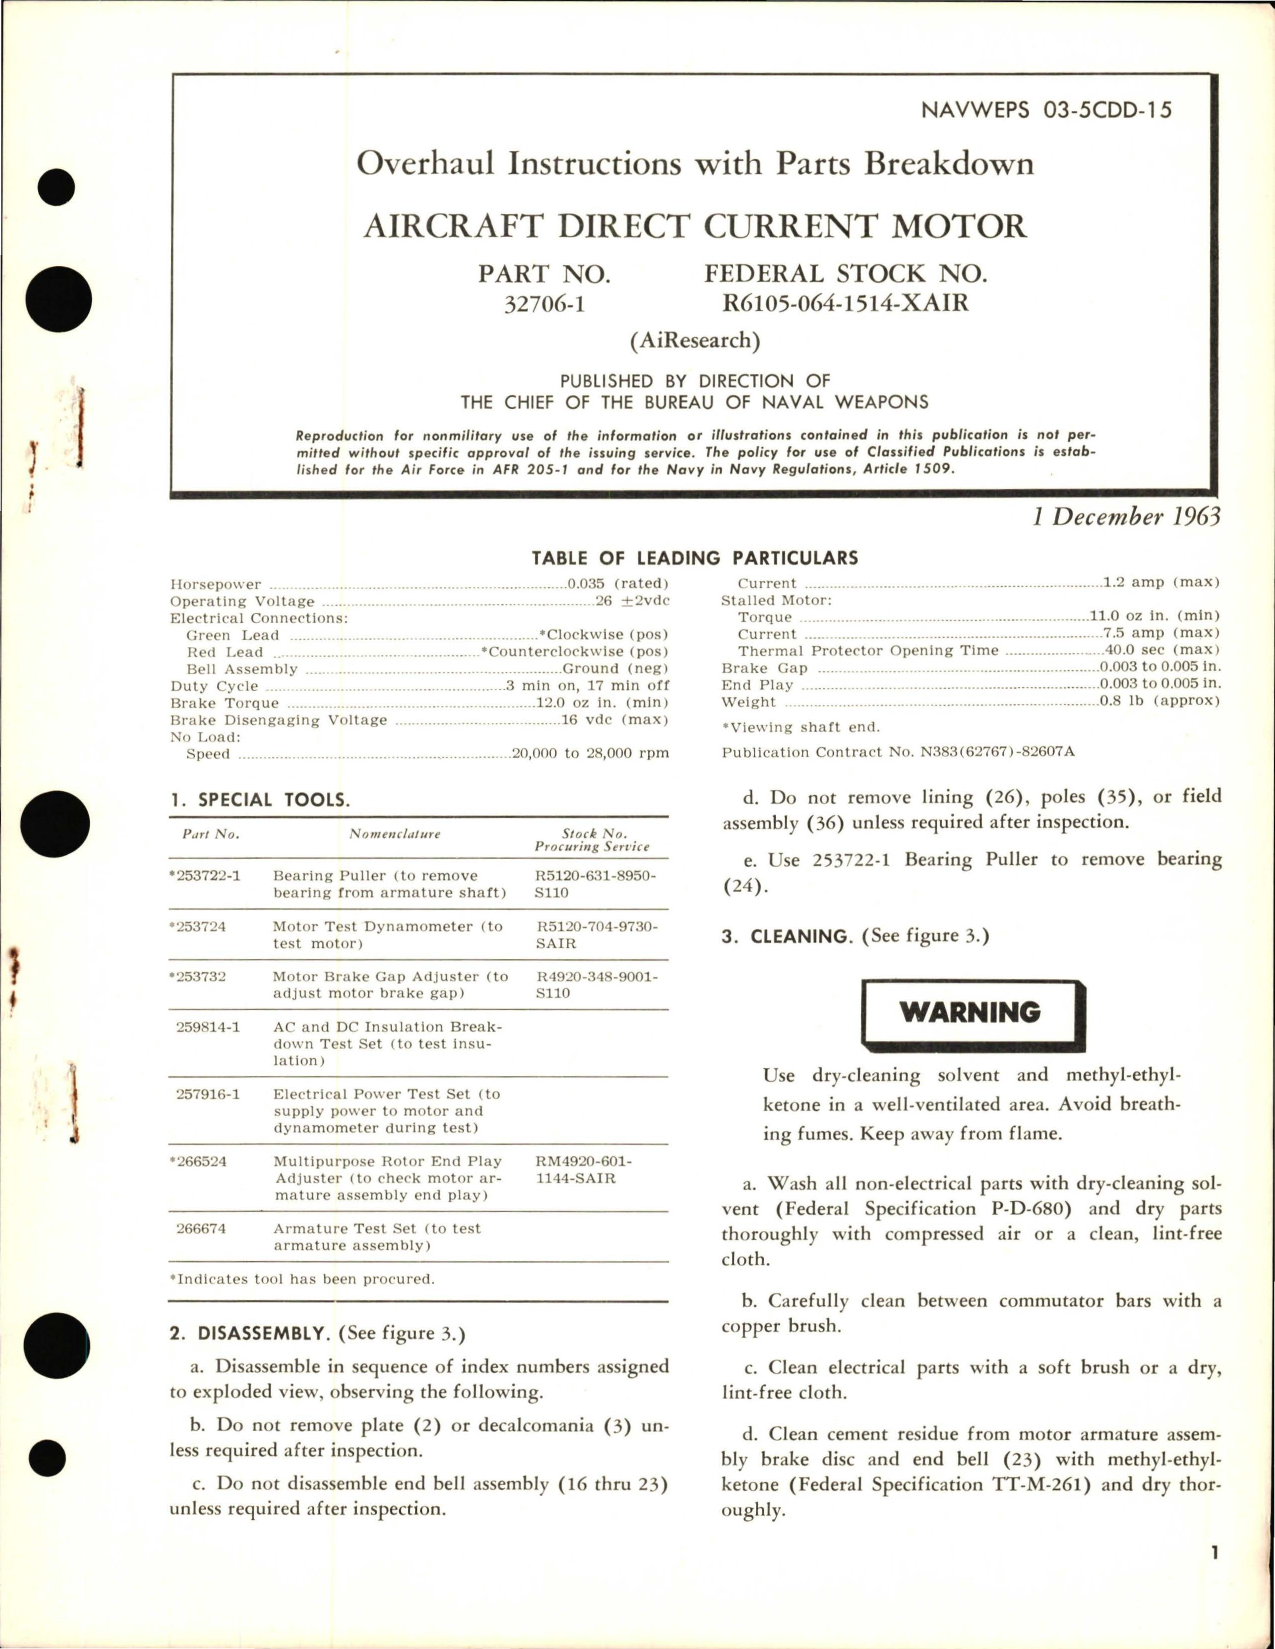 Sample page 1 from AirCorps Library document: Overhaul Instructions with Parts Breakdown for Aircraft Direct Current Motor - Part 32706-1